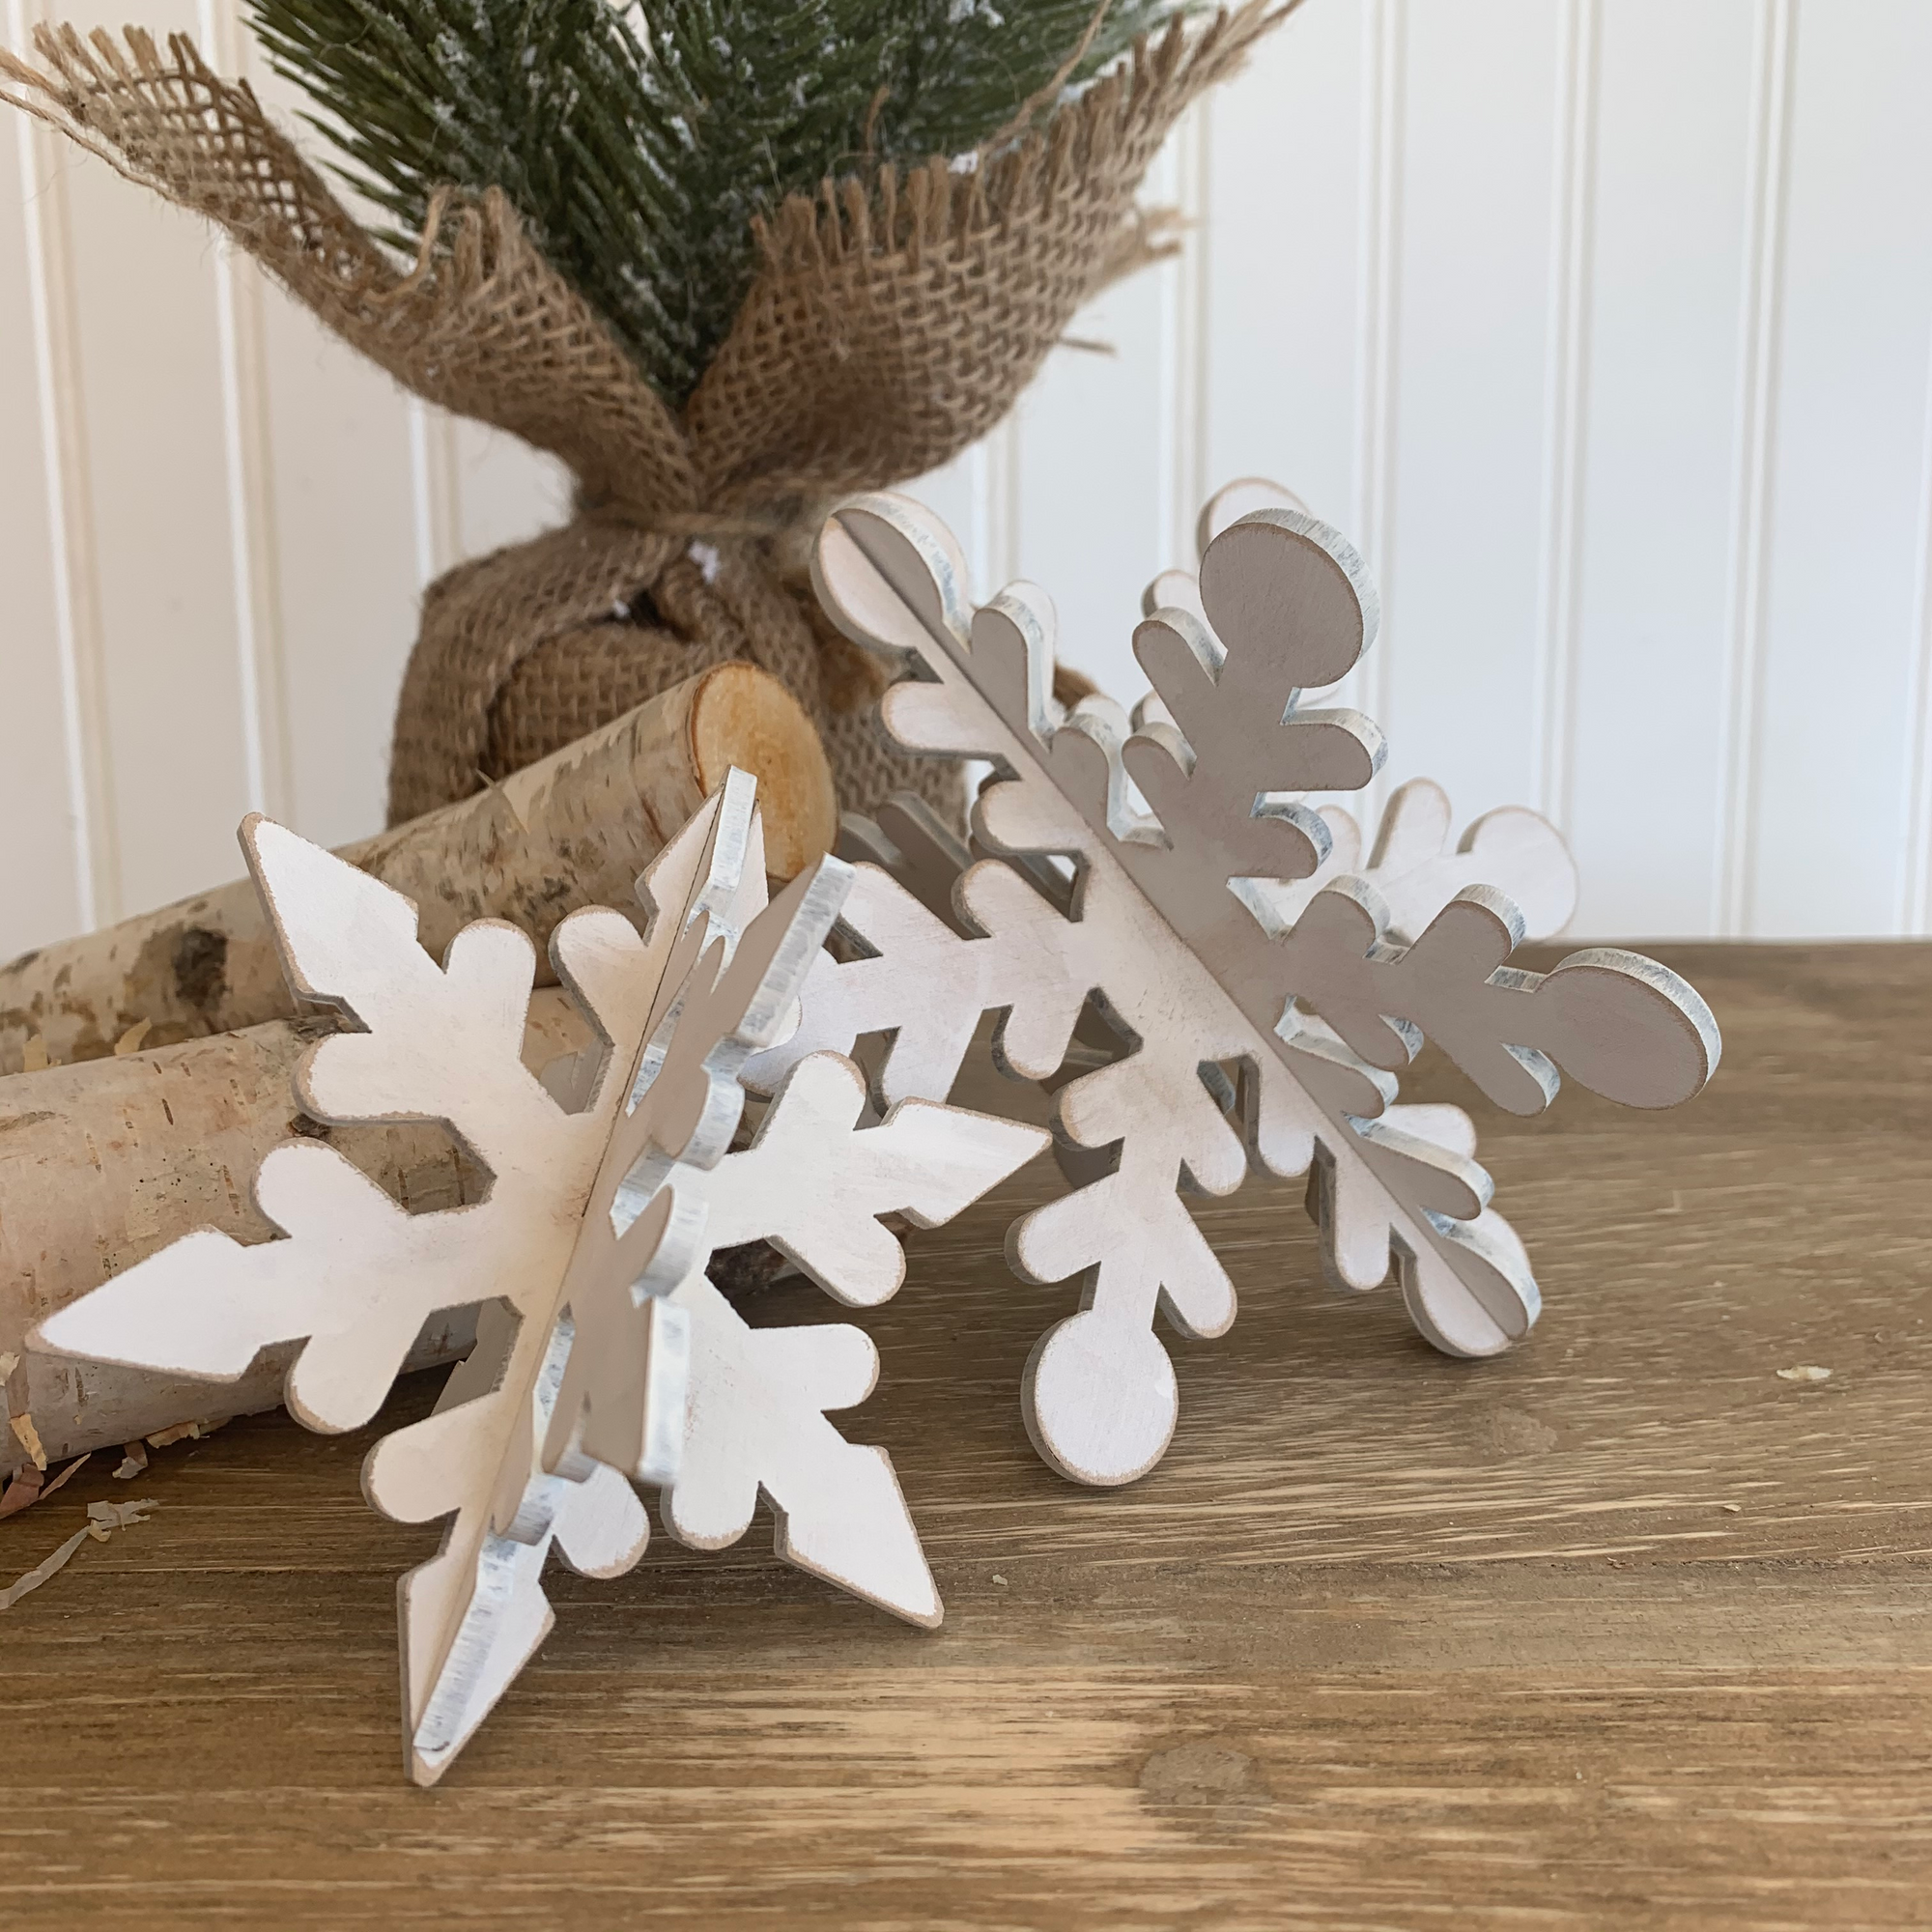 3D snowflakes, wood snowflakes, winter tiered tray decorations, winter snowflakes, handmade snowflakes